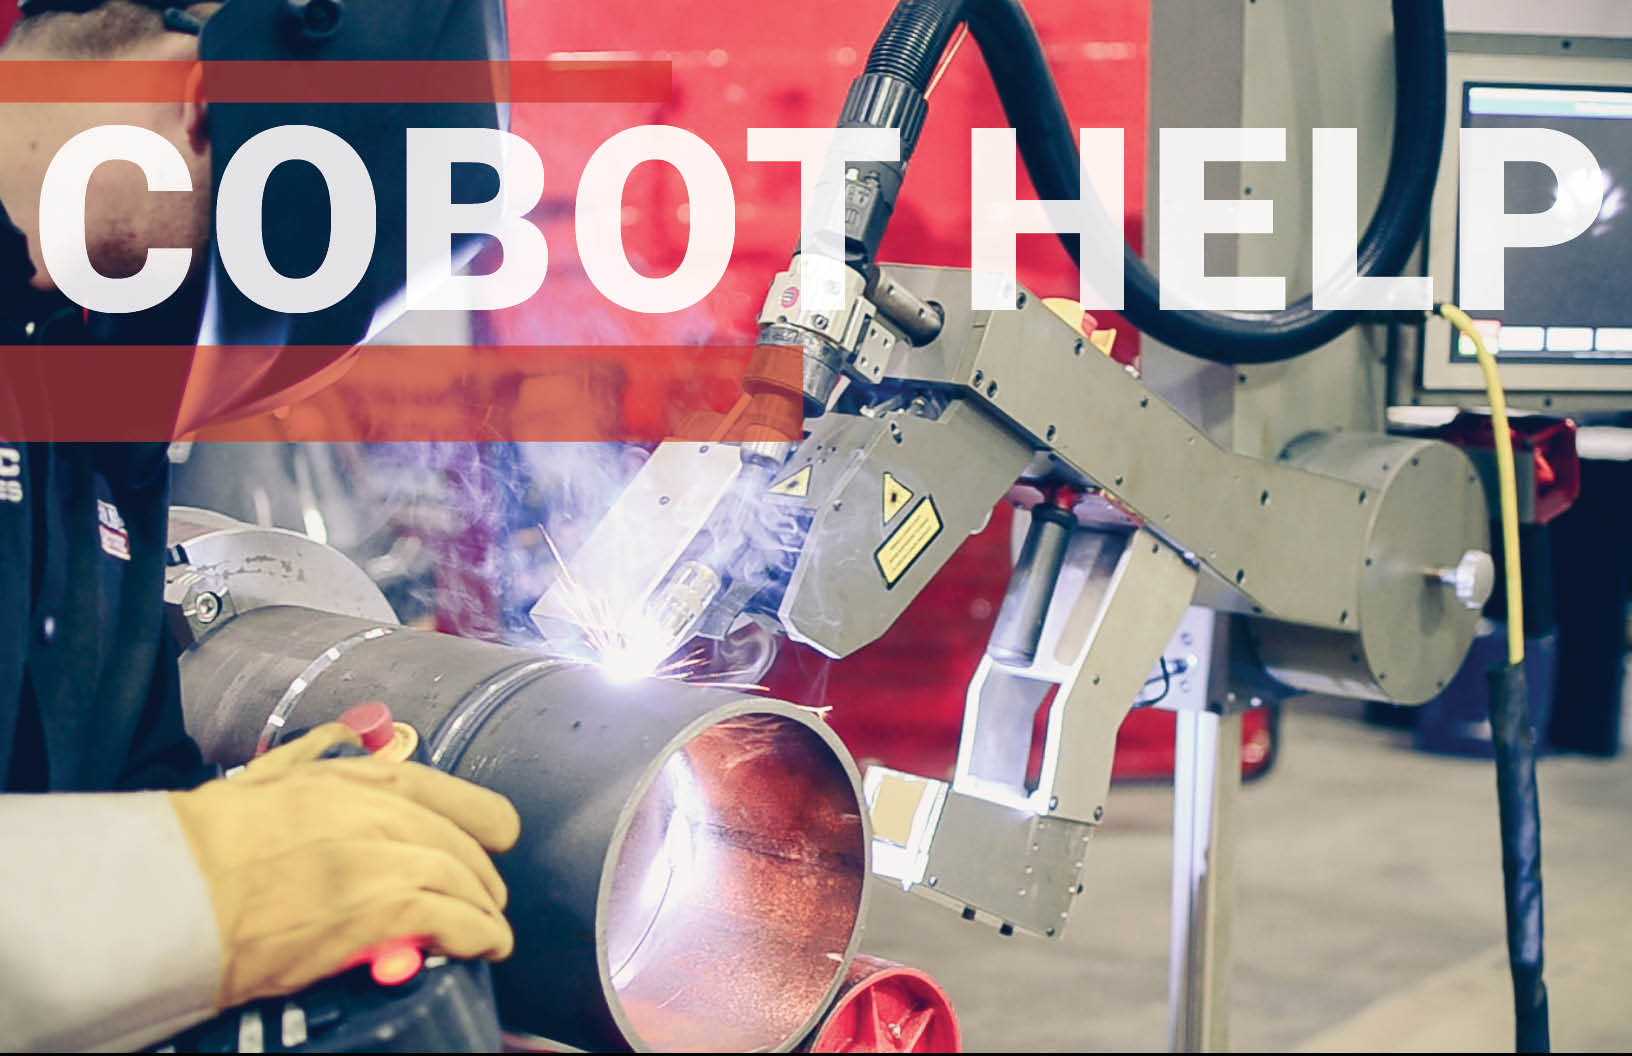 Cobot Help: Industry Success is Available with a Spool Welding Robot